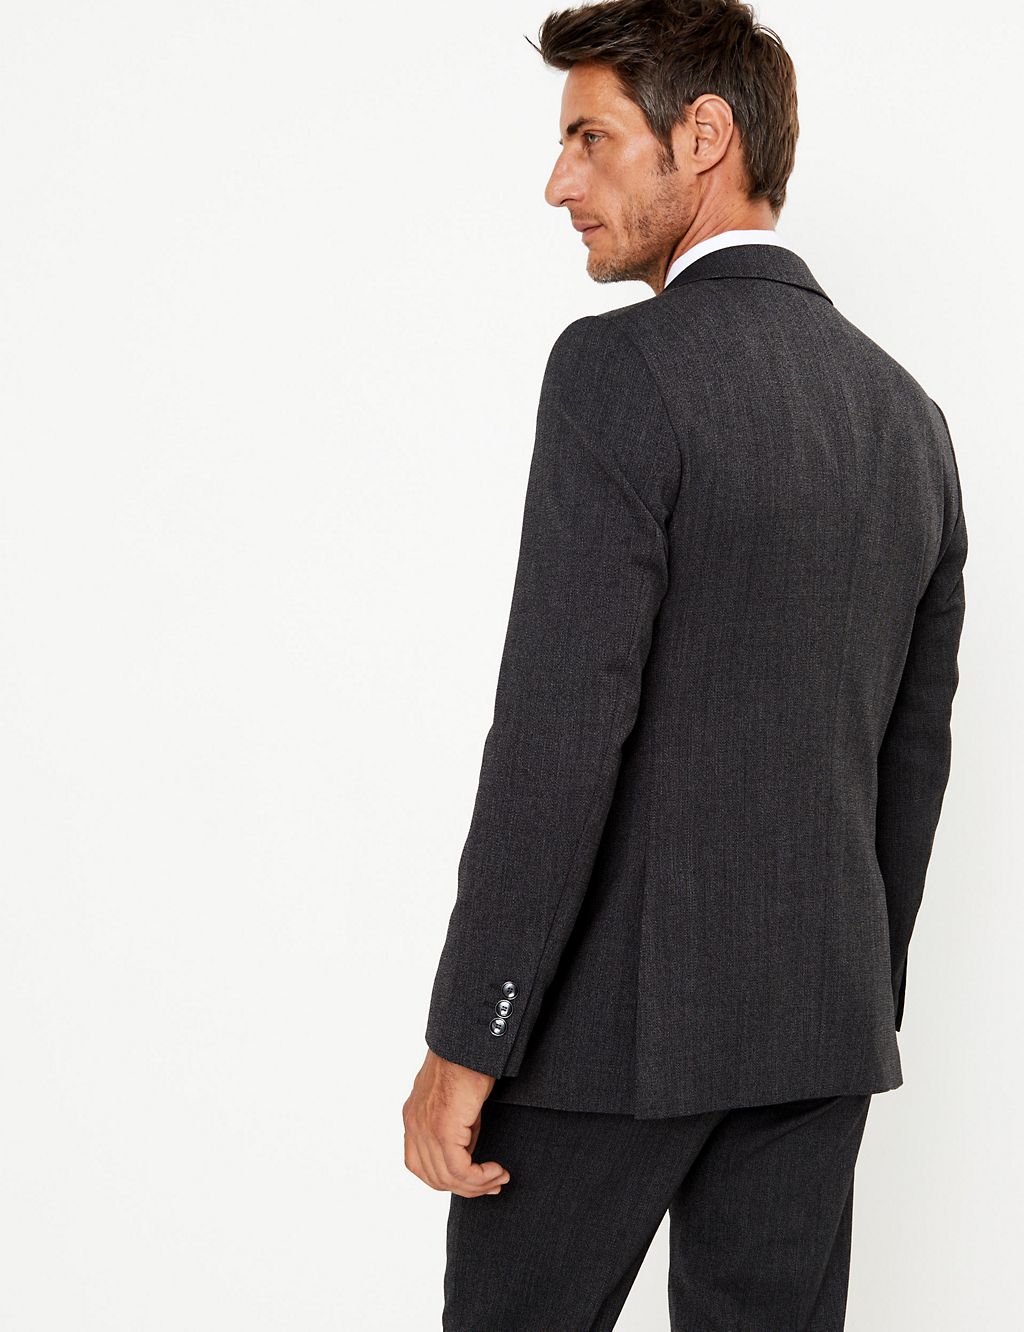 Charcoal Textured Regular Fit Jacket 8 of 8